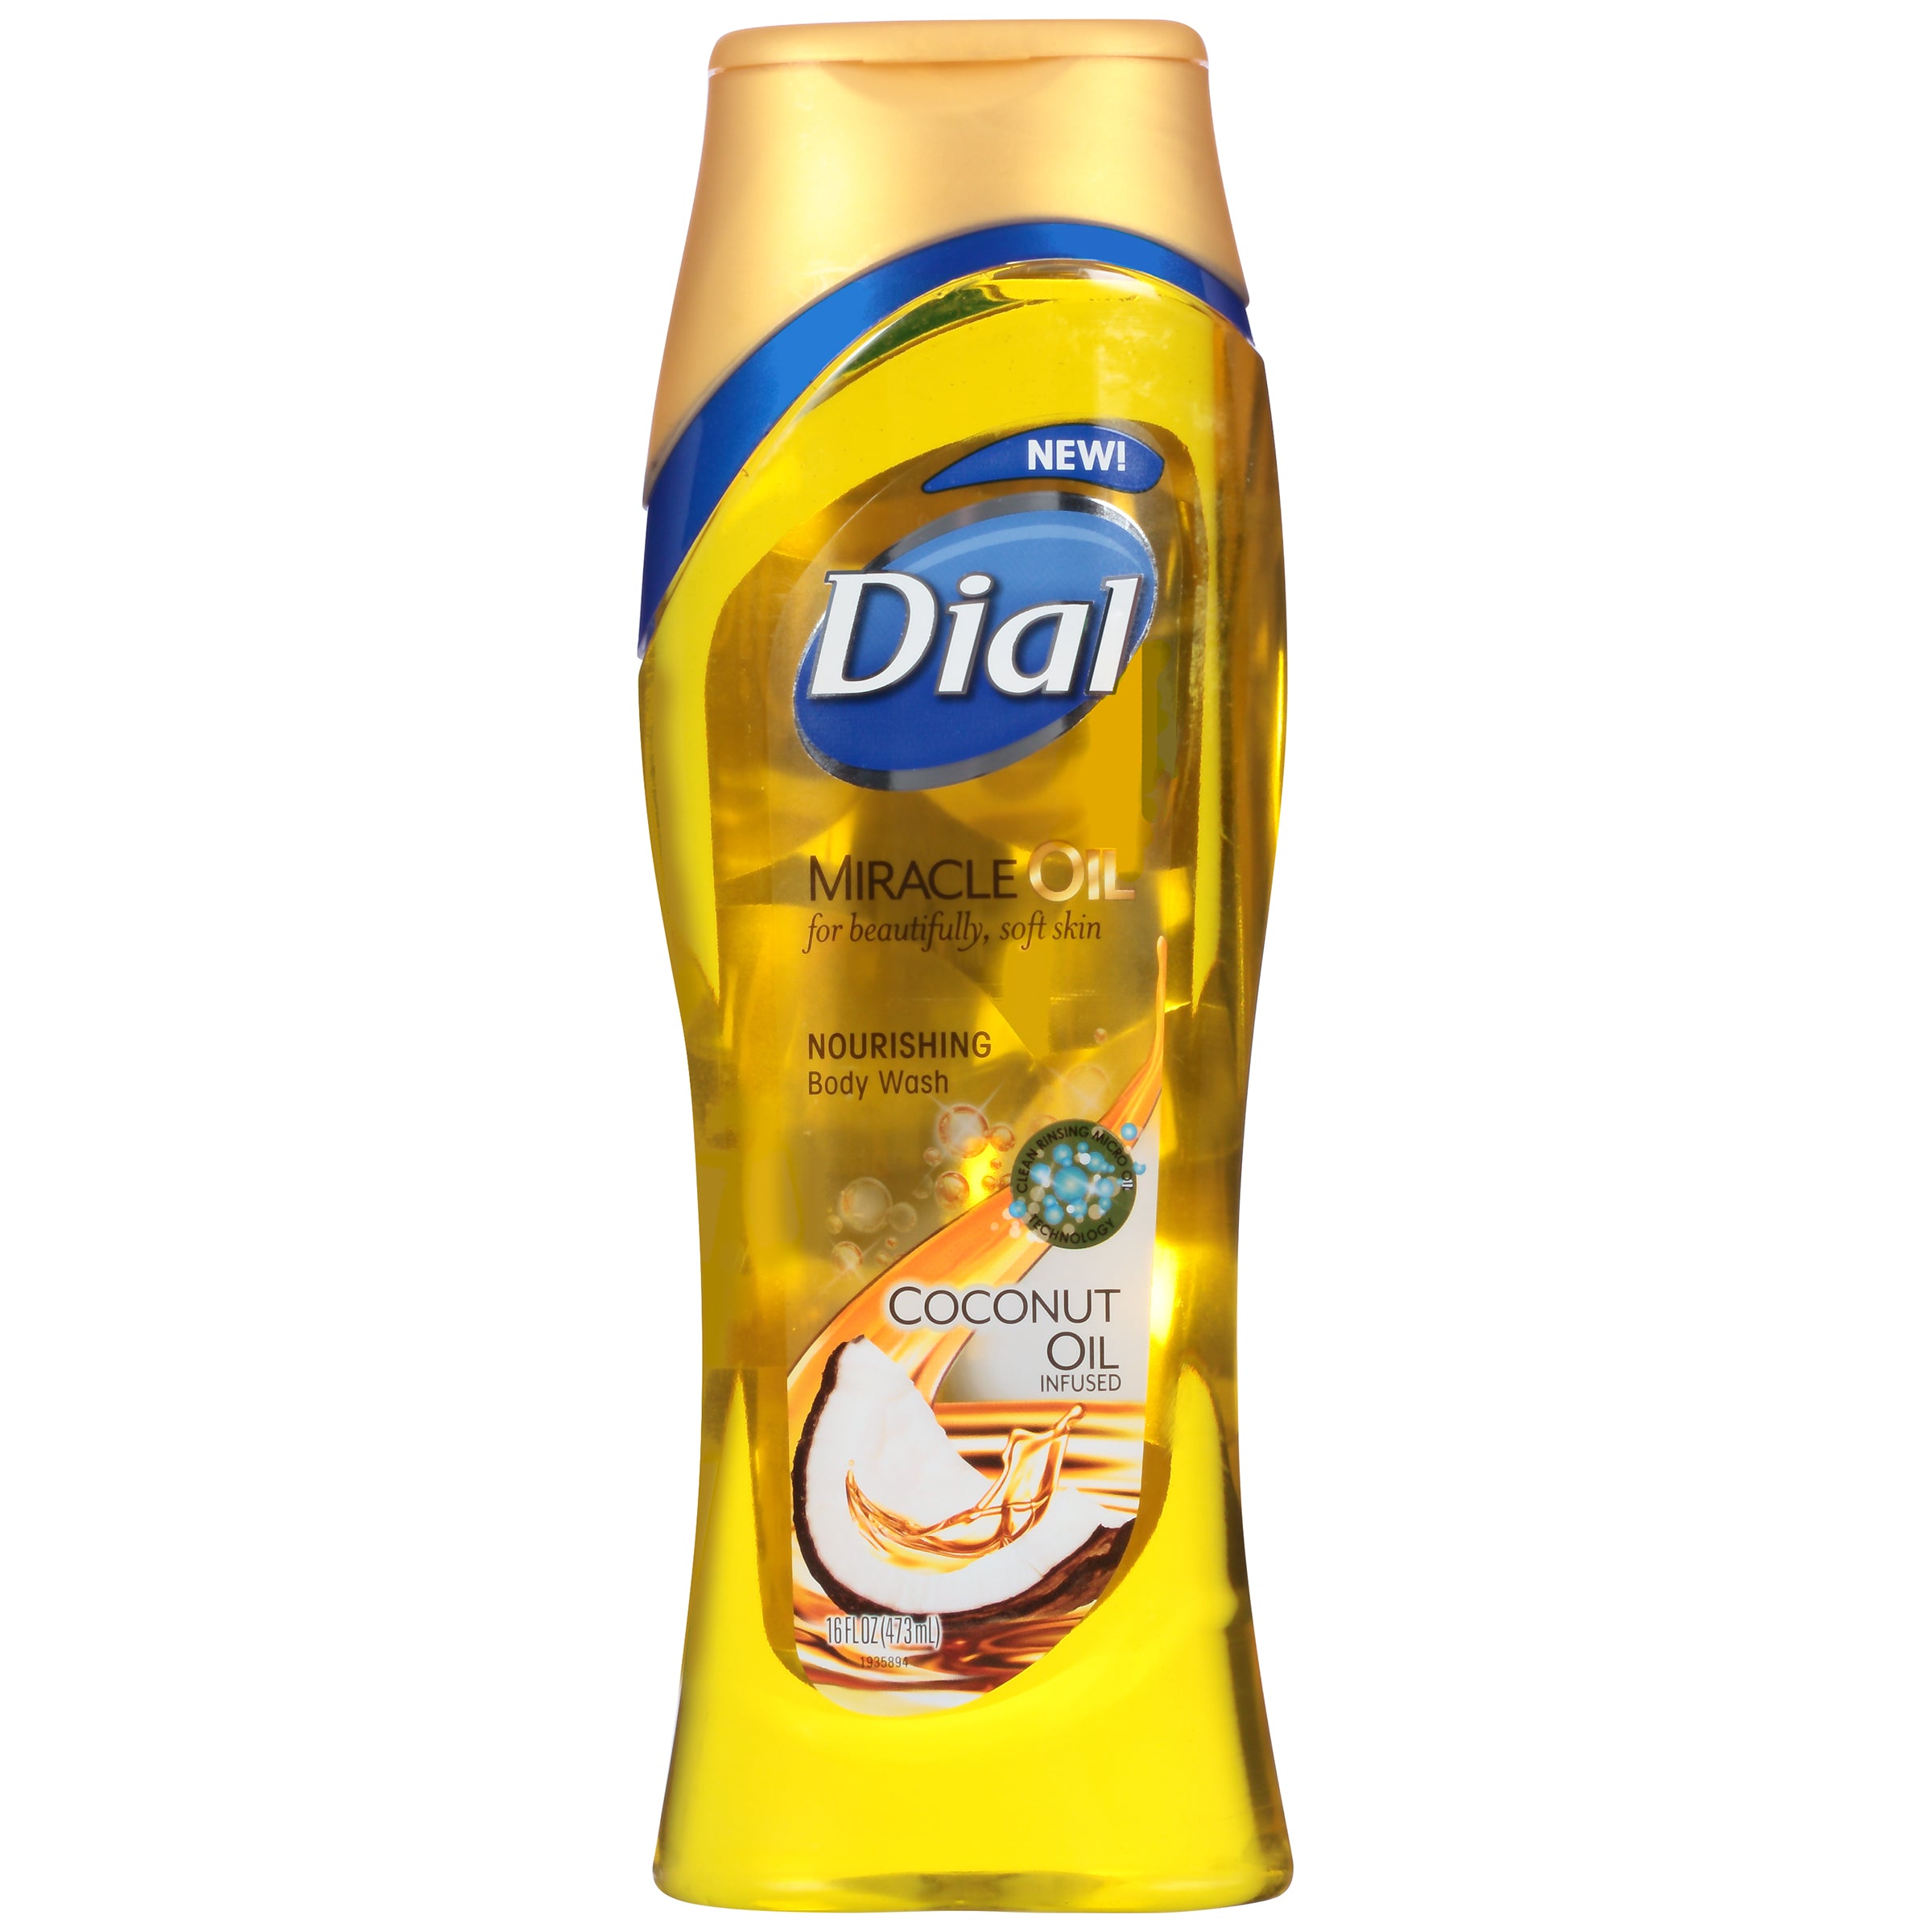 Dial Body Wash MIRACLE OIL COCONUT 16OZ/6pk